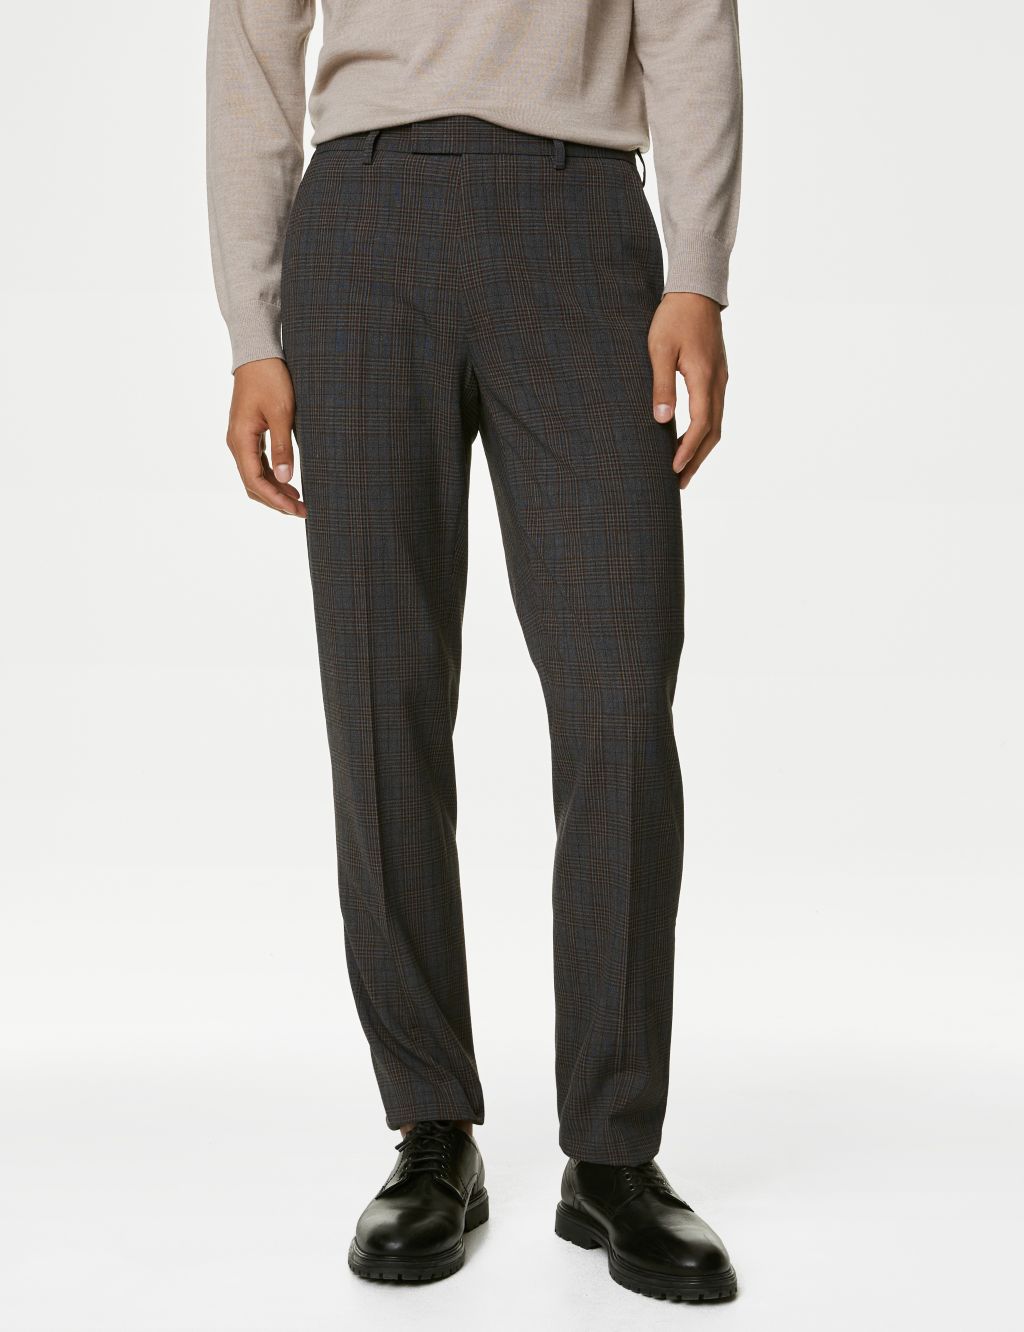 Textured Checked Stretch Trousers image 3